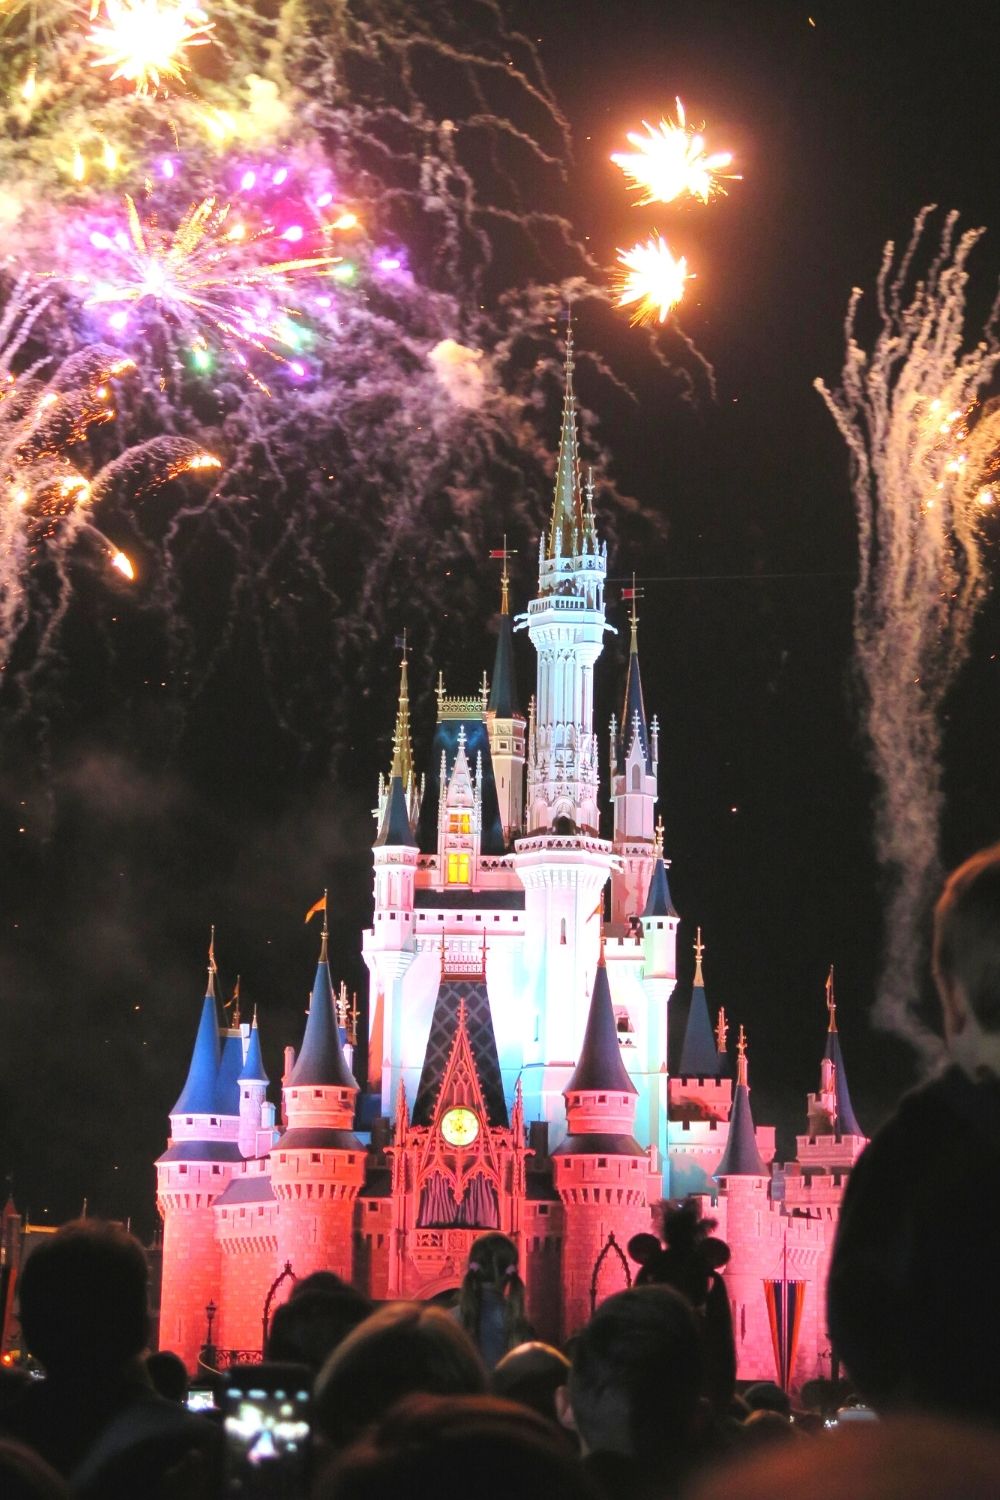 Cinderella Castle at Disney World lit up at night with fireworks overhead